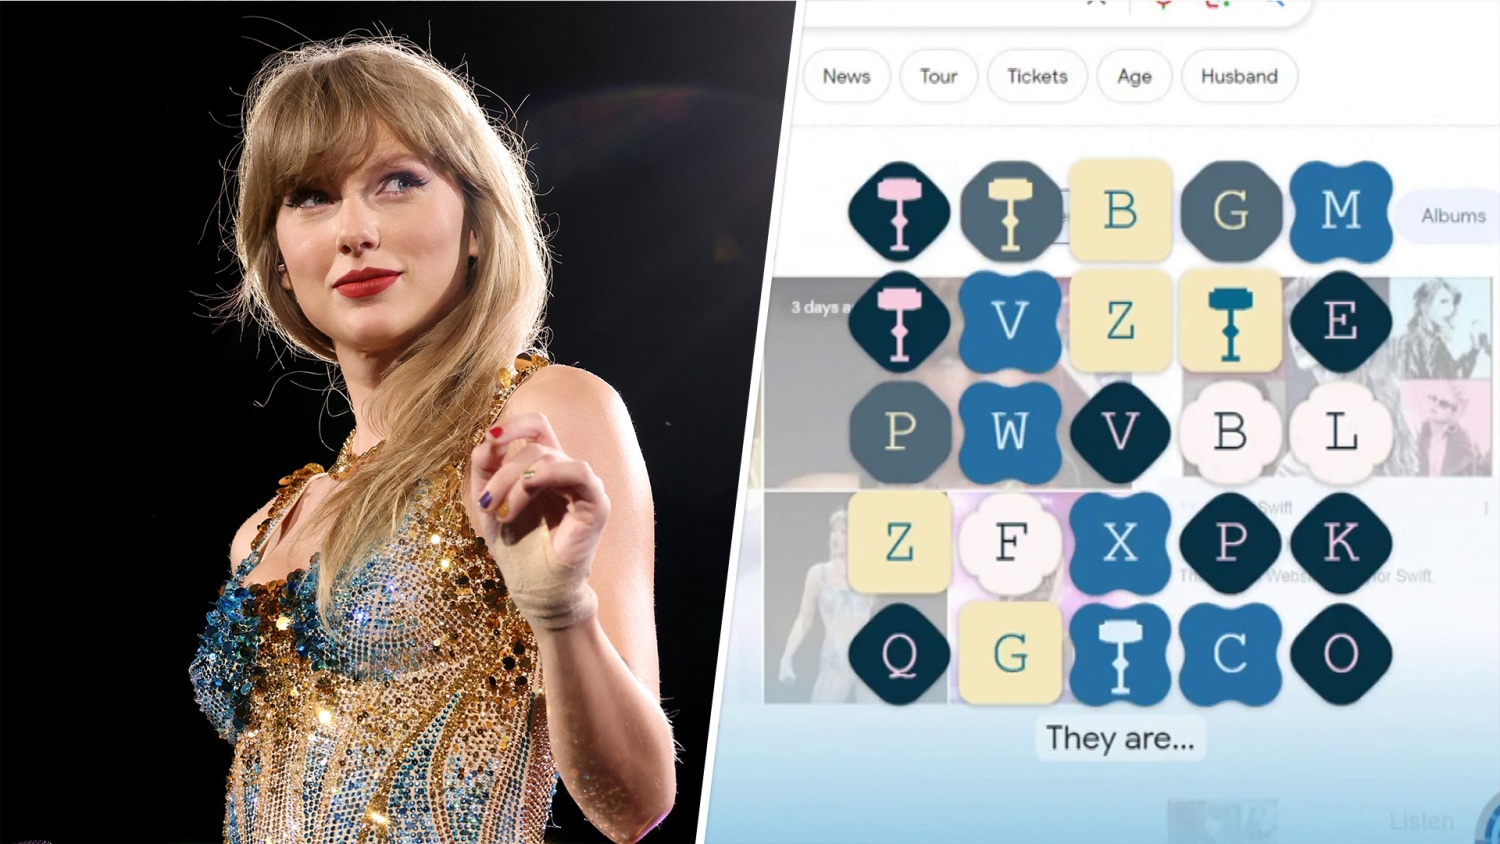 All Latest Taylor Swift Songs Roblox ID Codes - The Game